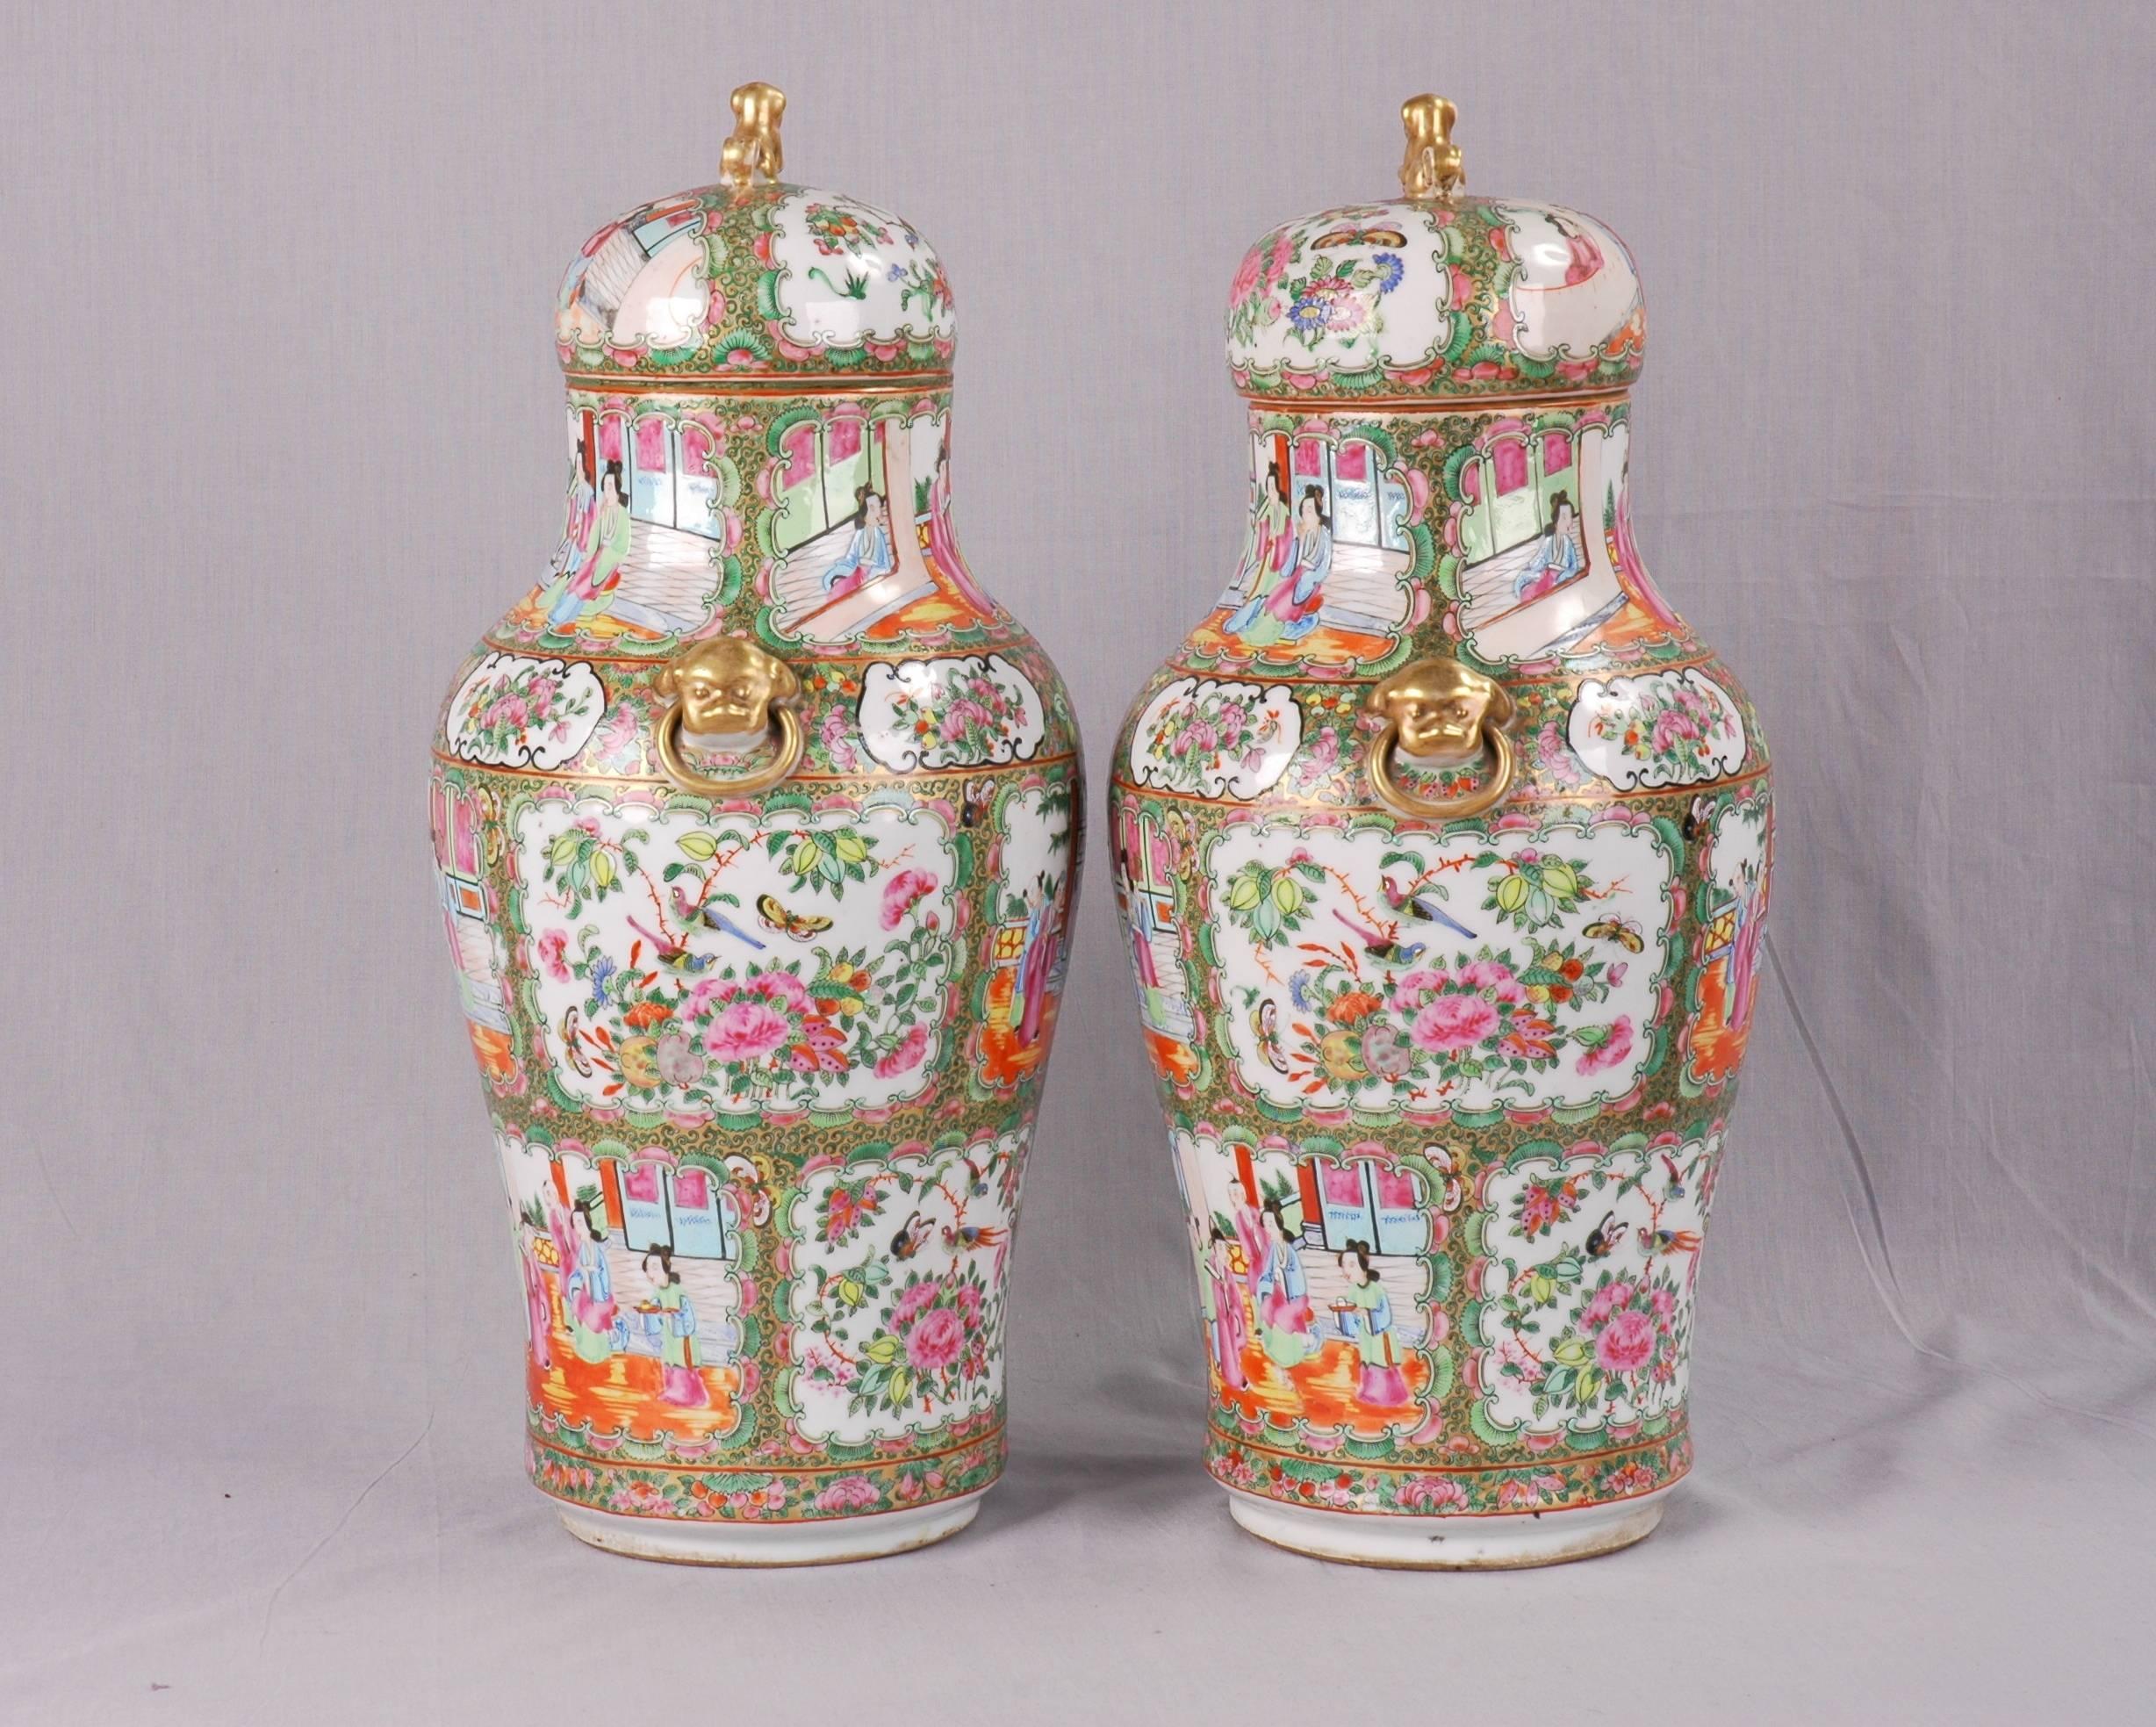 Pair of rose medallion covered vases, China, 19th century.
Chinese export porcelain vases feature domed lids with foo
fog finials and ring handles applied at the shoulder.